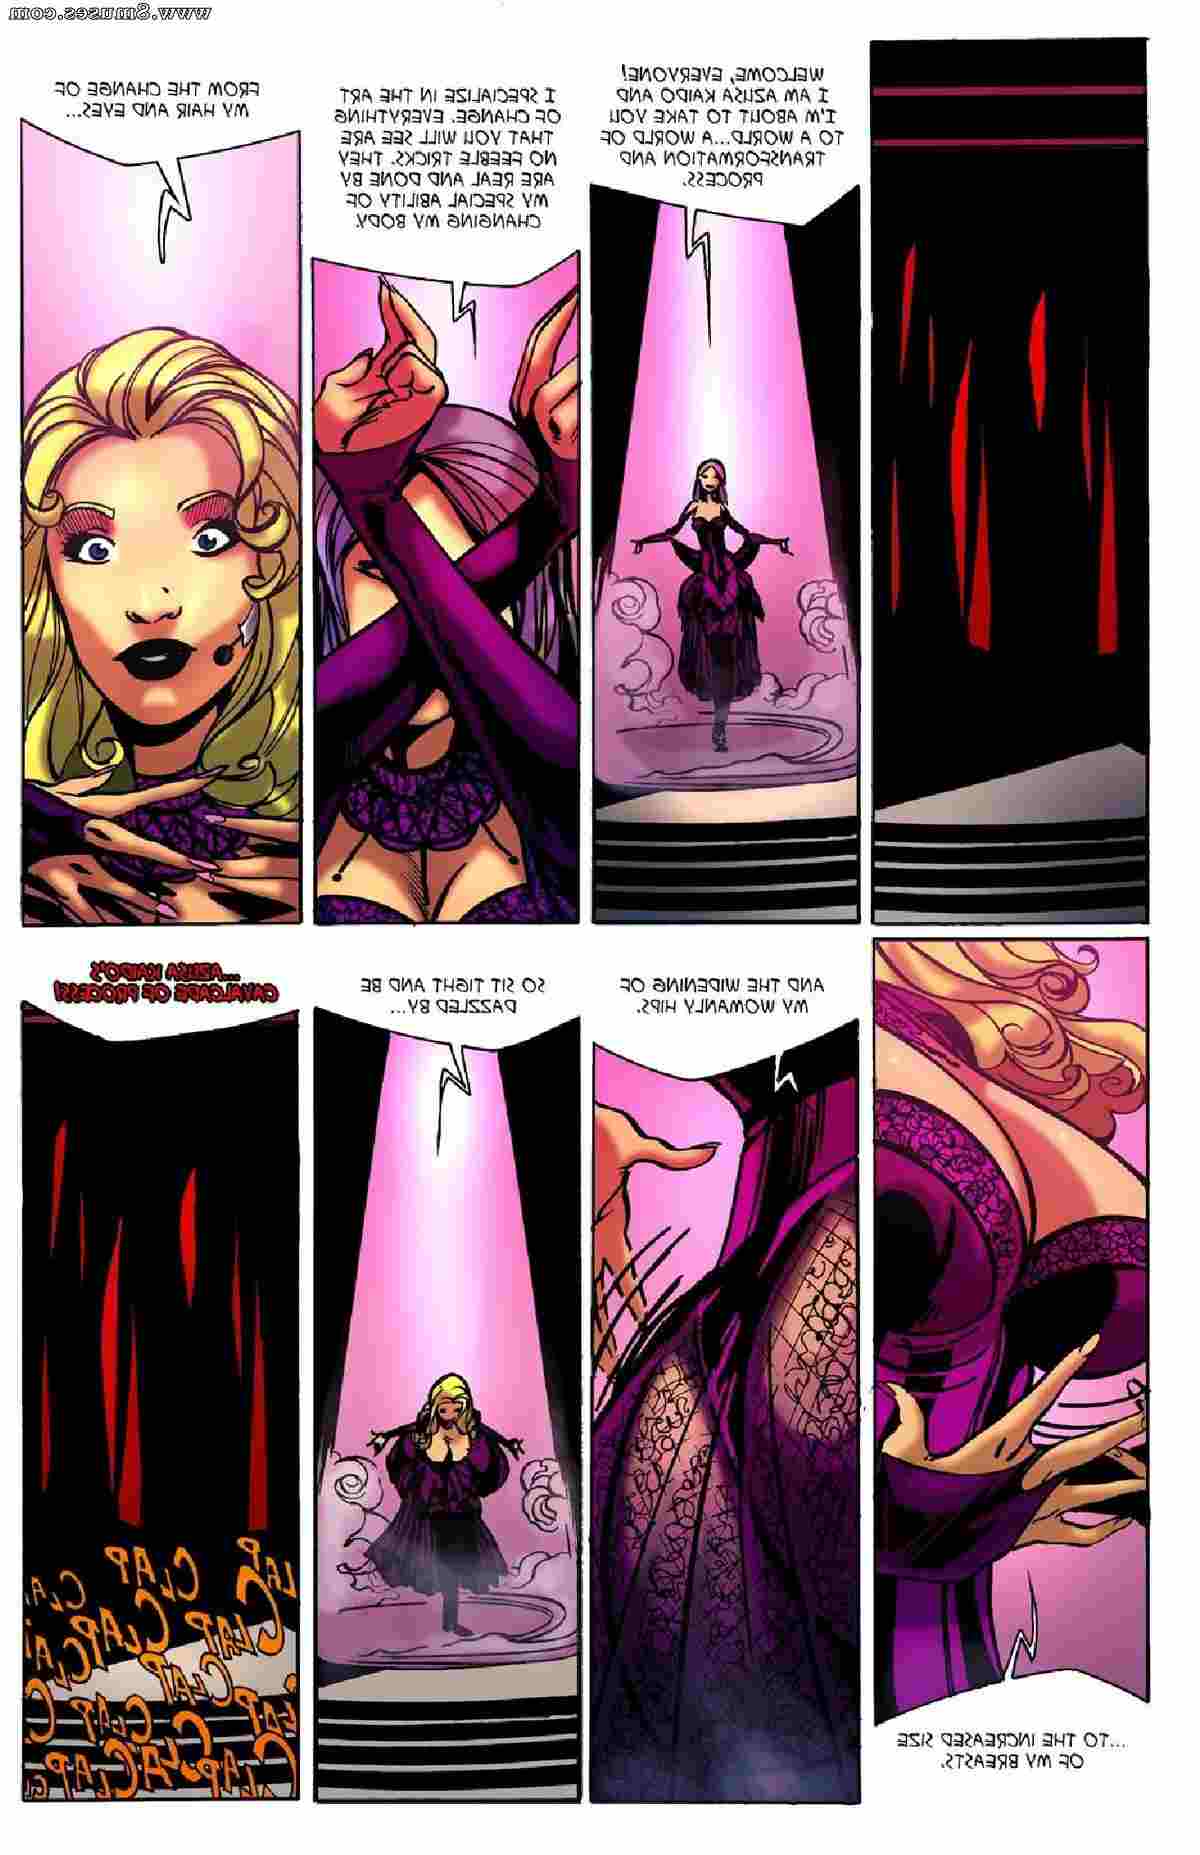 BE-Story-Club-Comics/Changing-and-Growing-in-Las-Vegas Changing_and_Growing_in_Las_Vegas__8muses_-_Sex_and_Porn_Comics_50.jpg